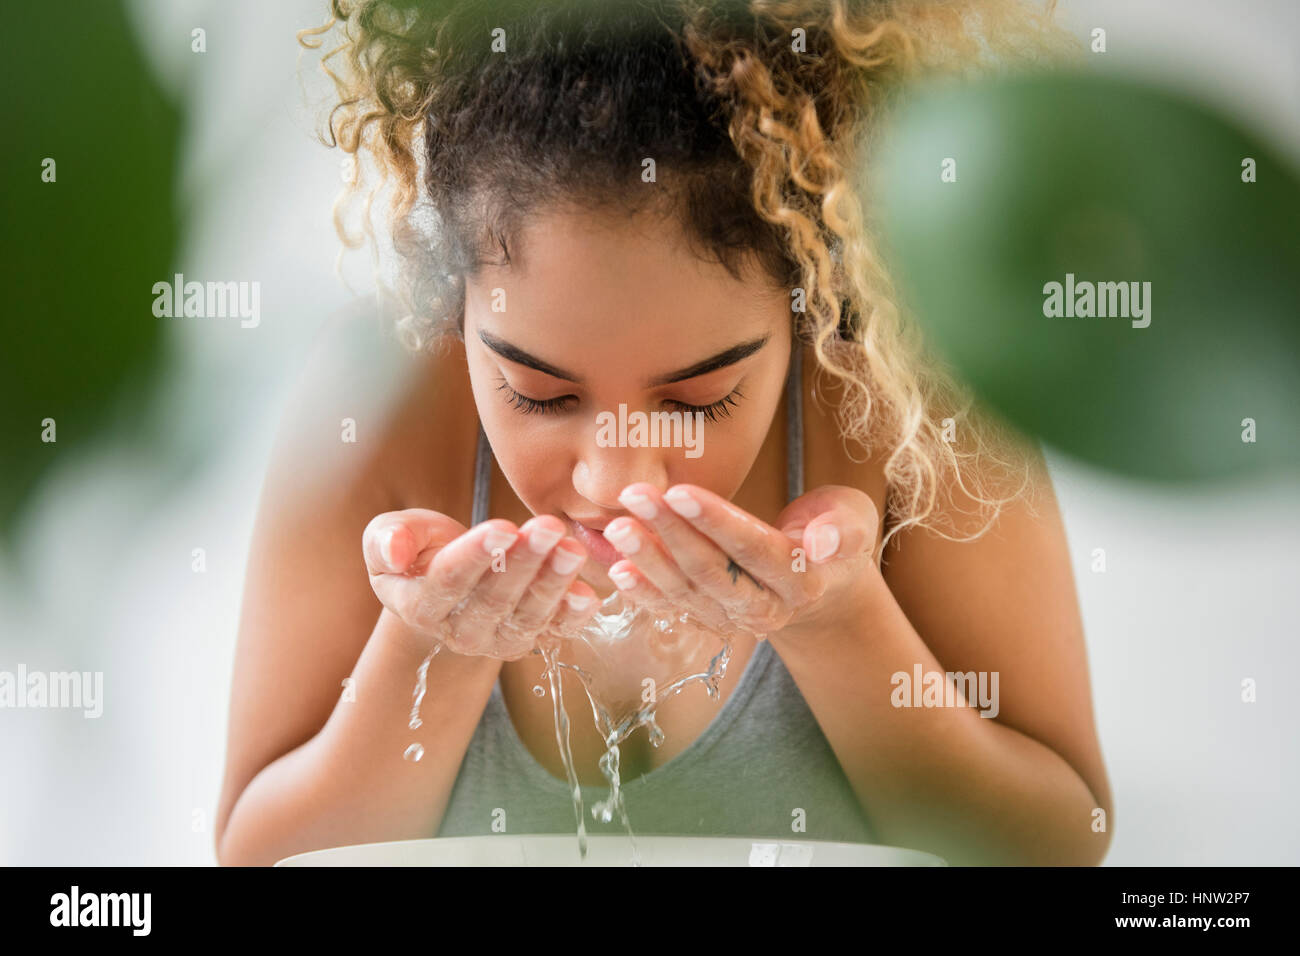 Mixed Race woman splashing water on face Banque D'Images